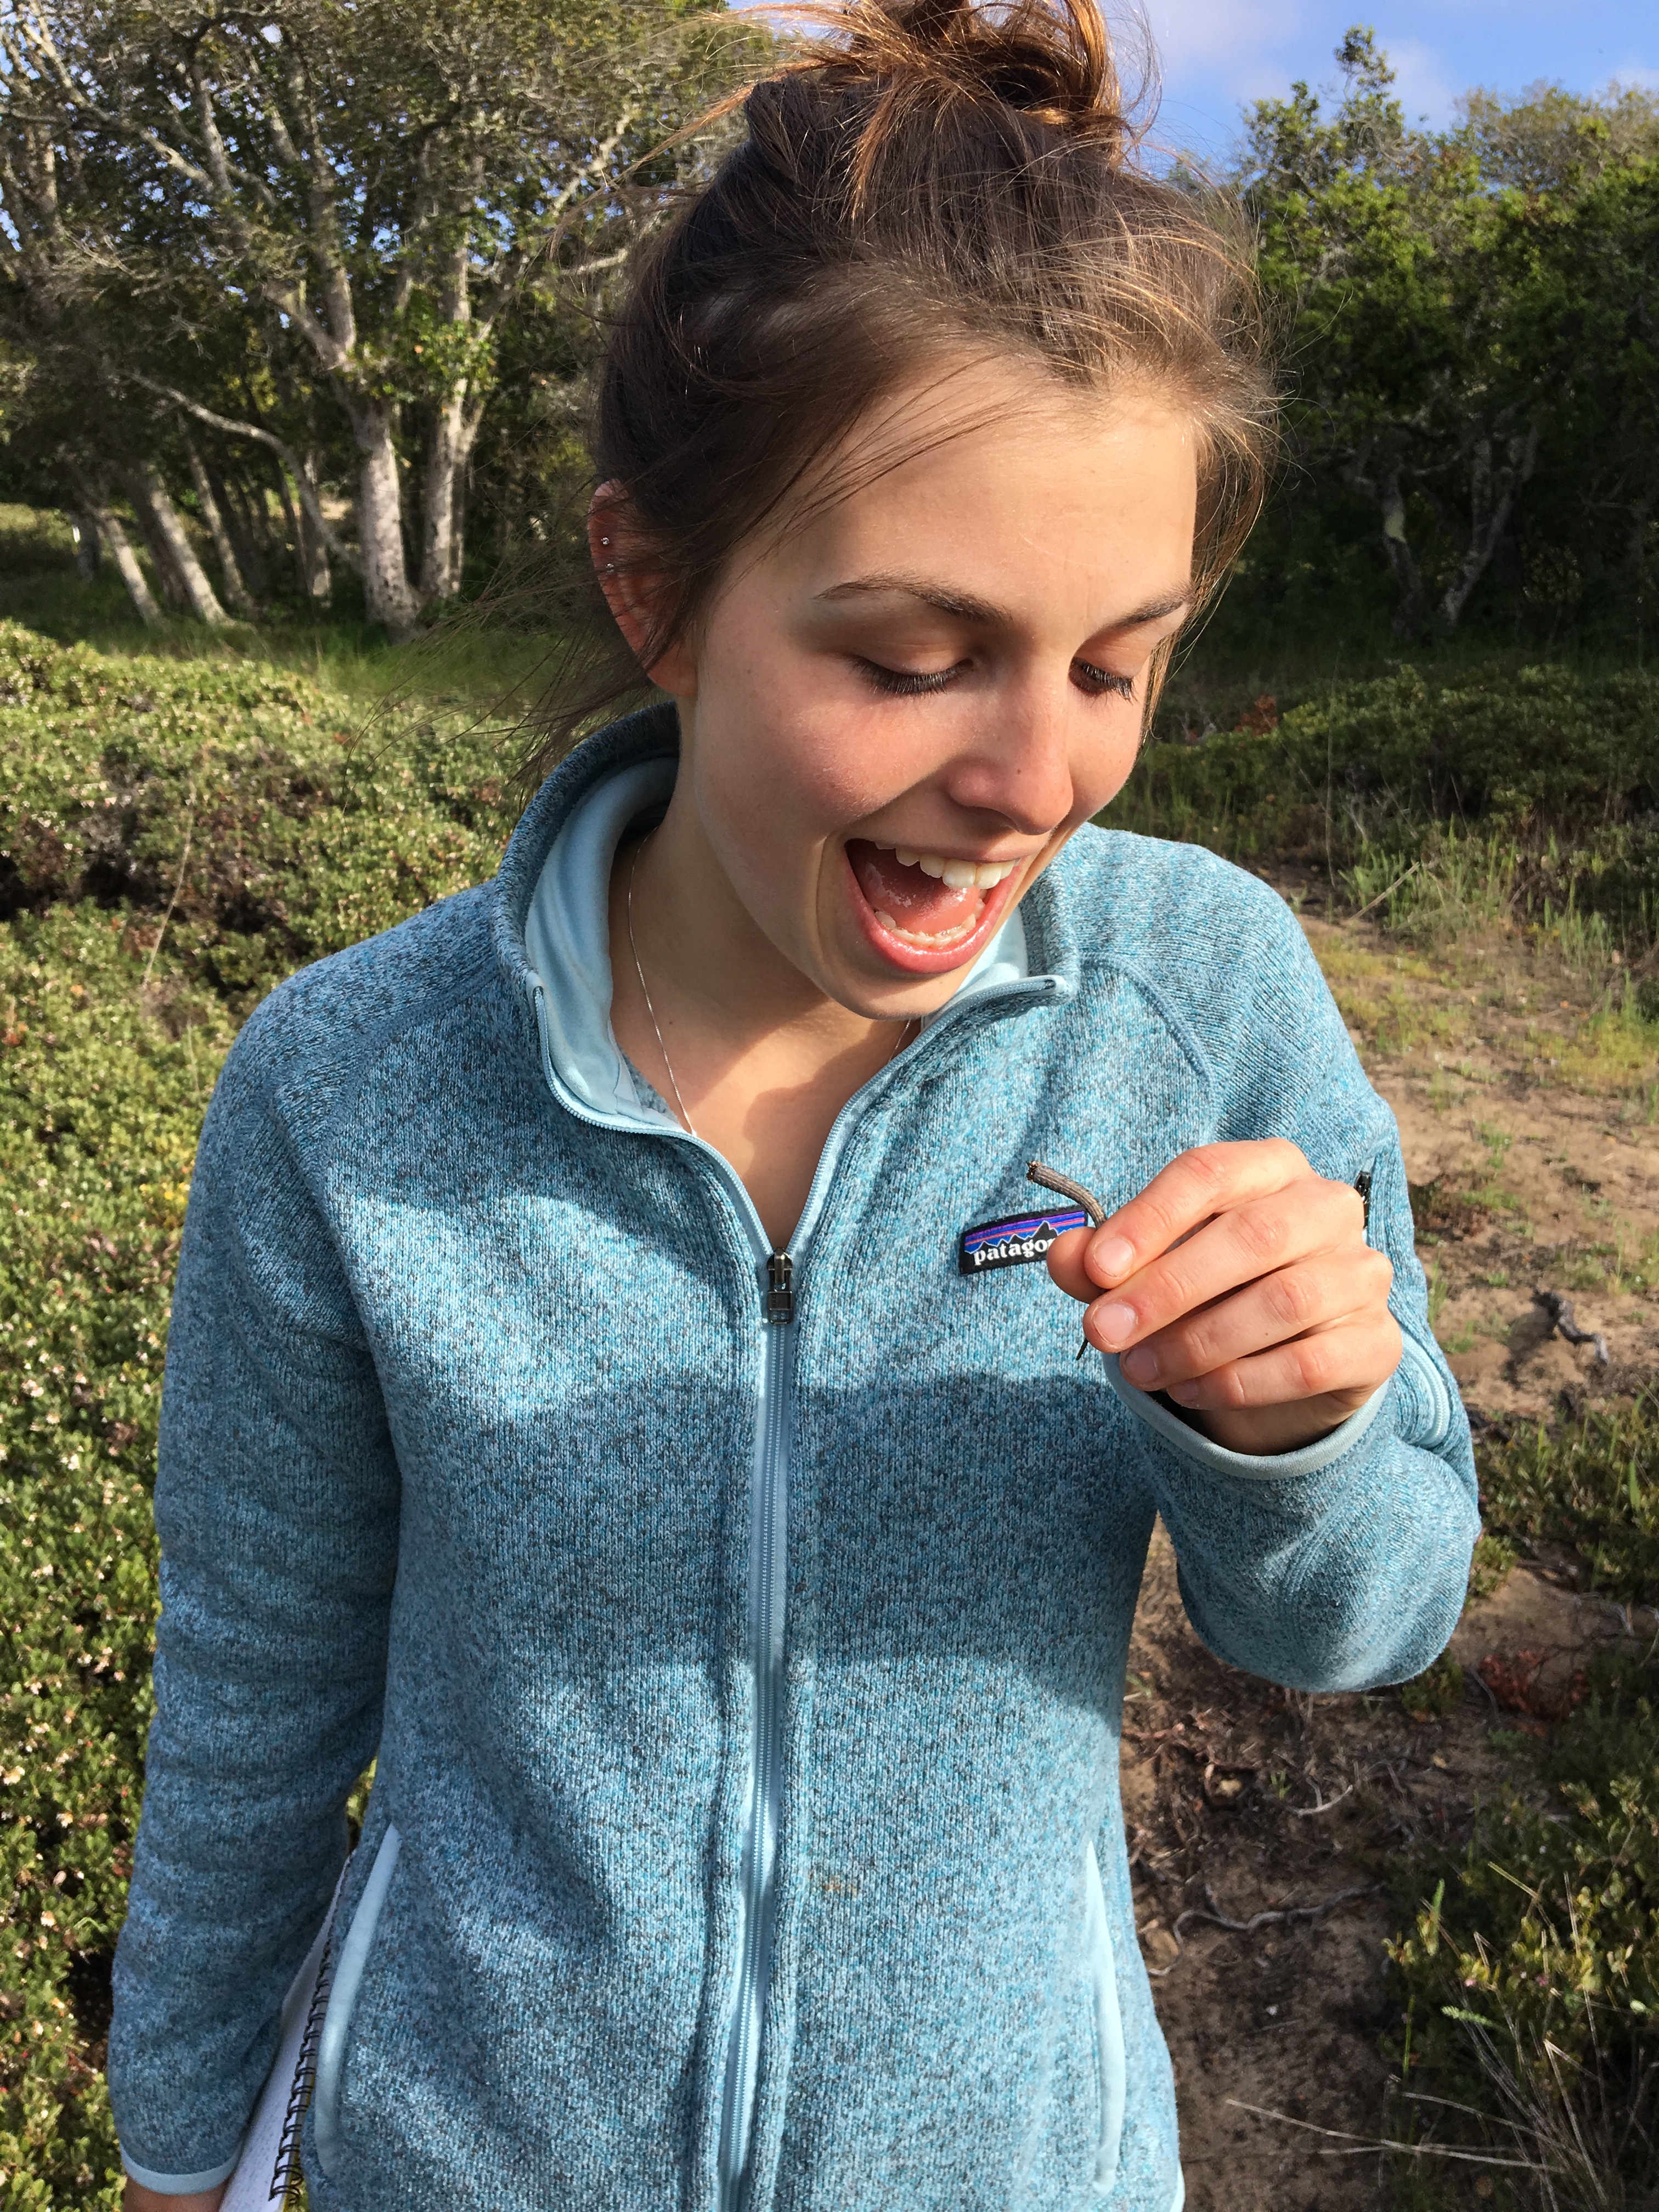 caitlyn rich smiling or screaming about  a broken alligator lizard's tail in her hand